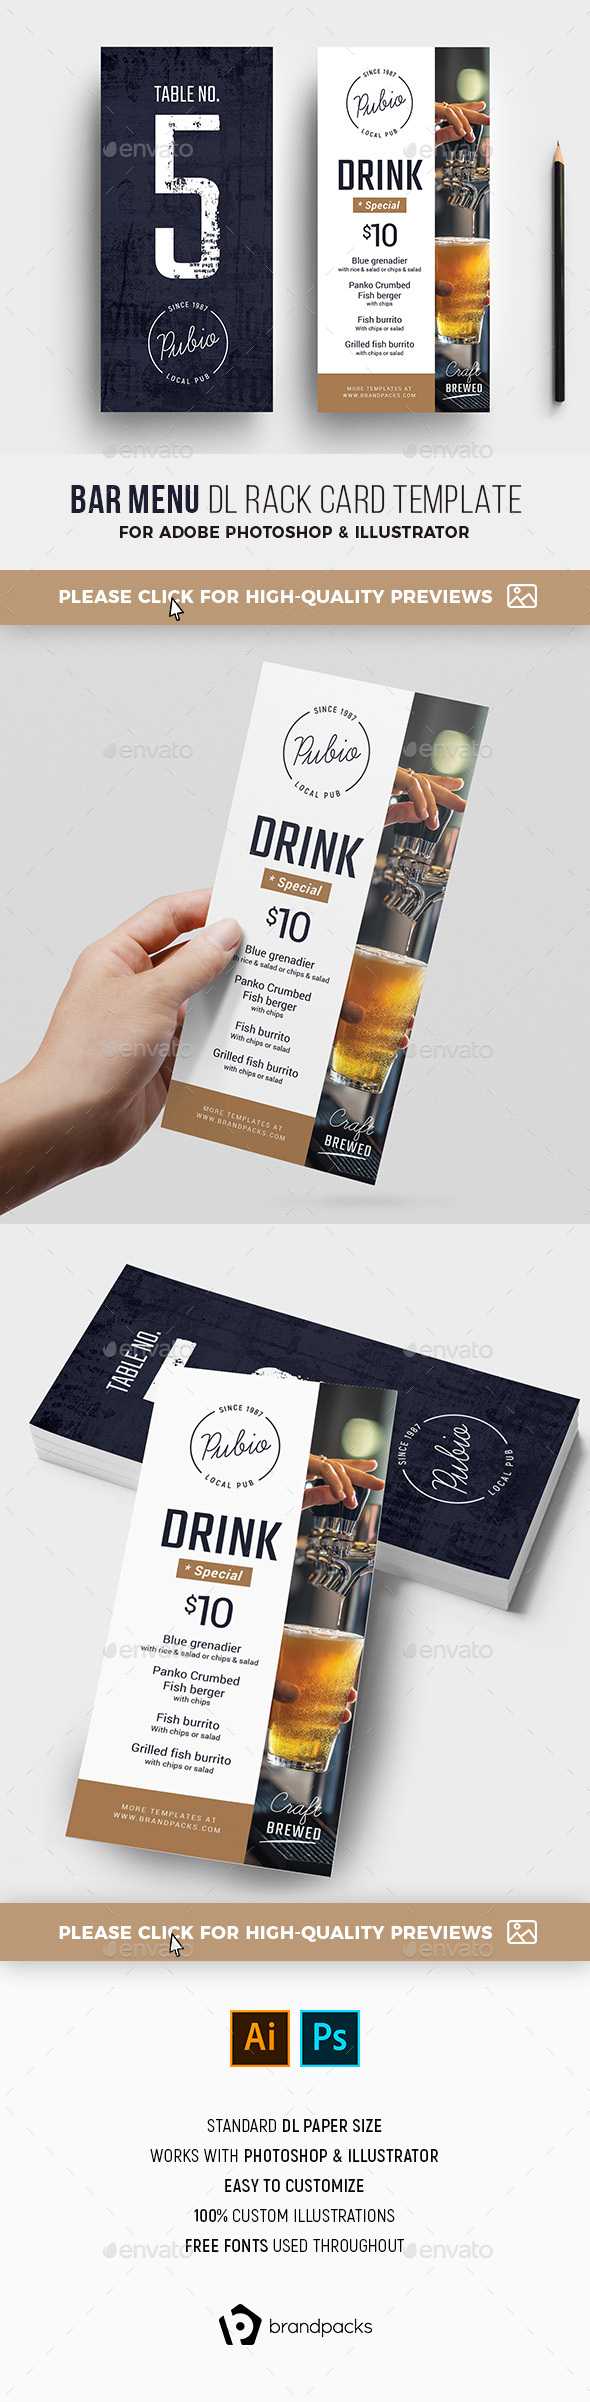 Brandpacks And Dl Card Graphics, Designs & Templates Intended For Dl Card Template